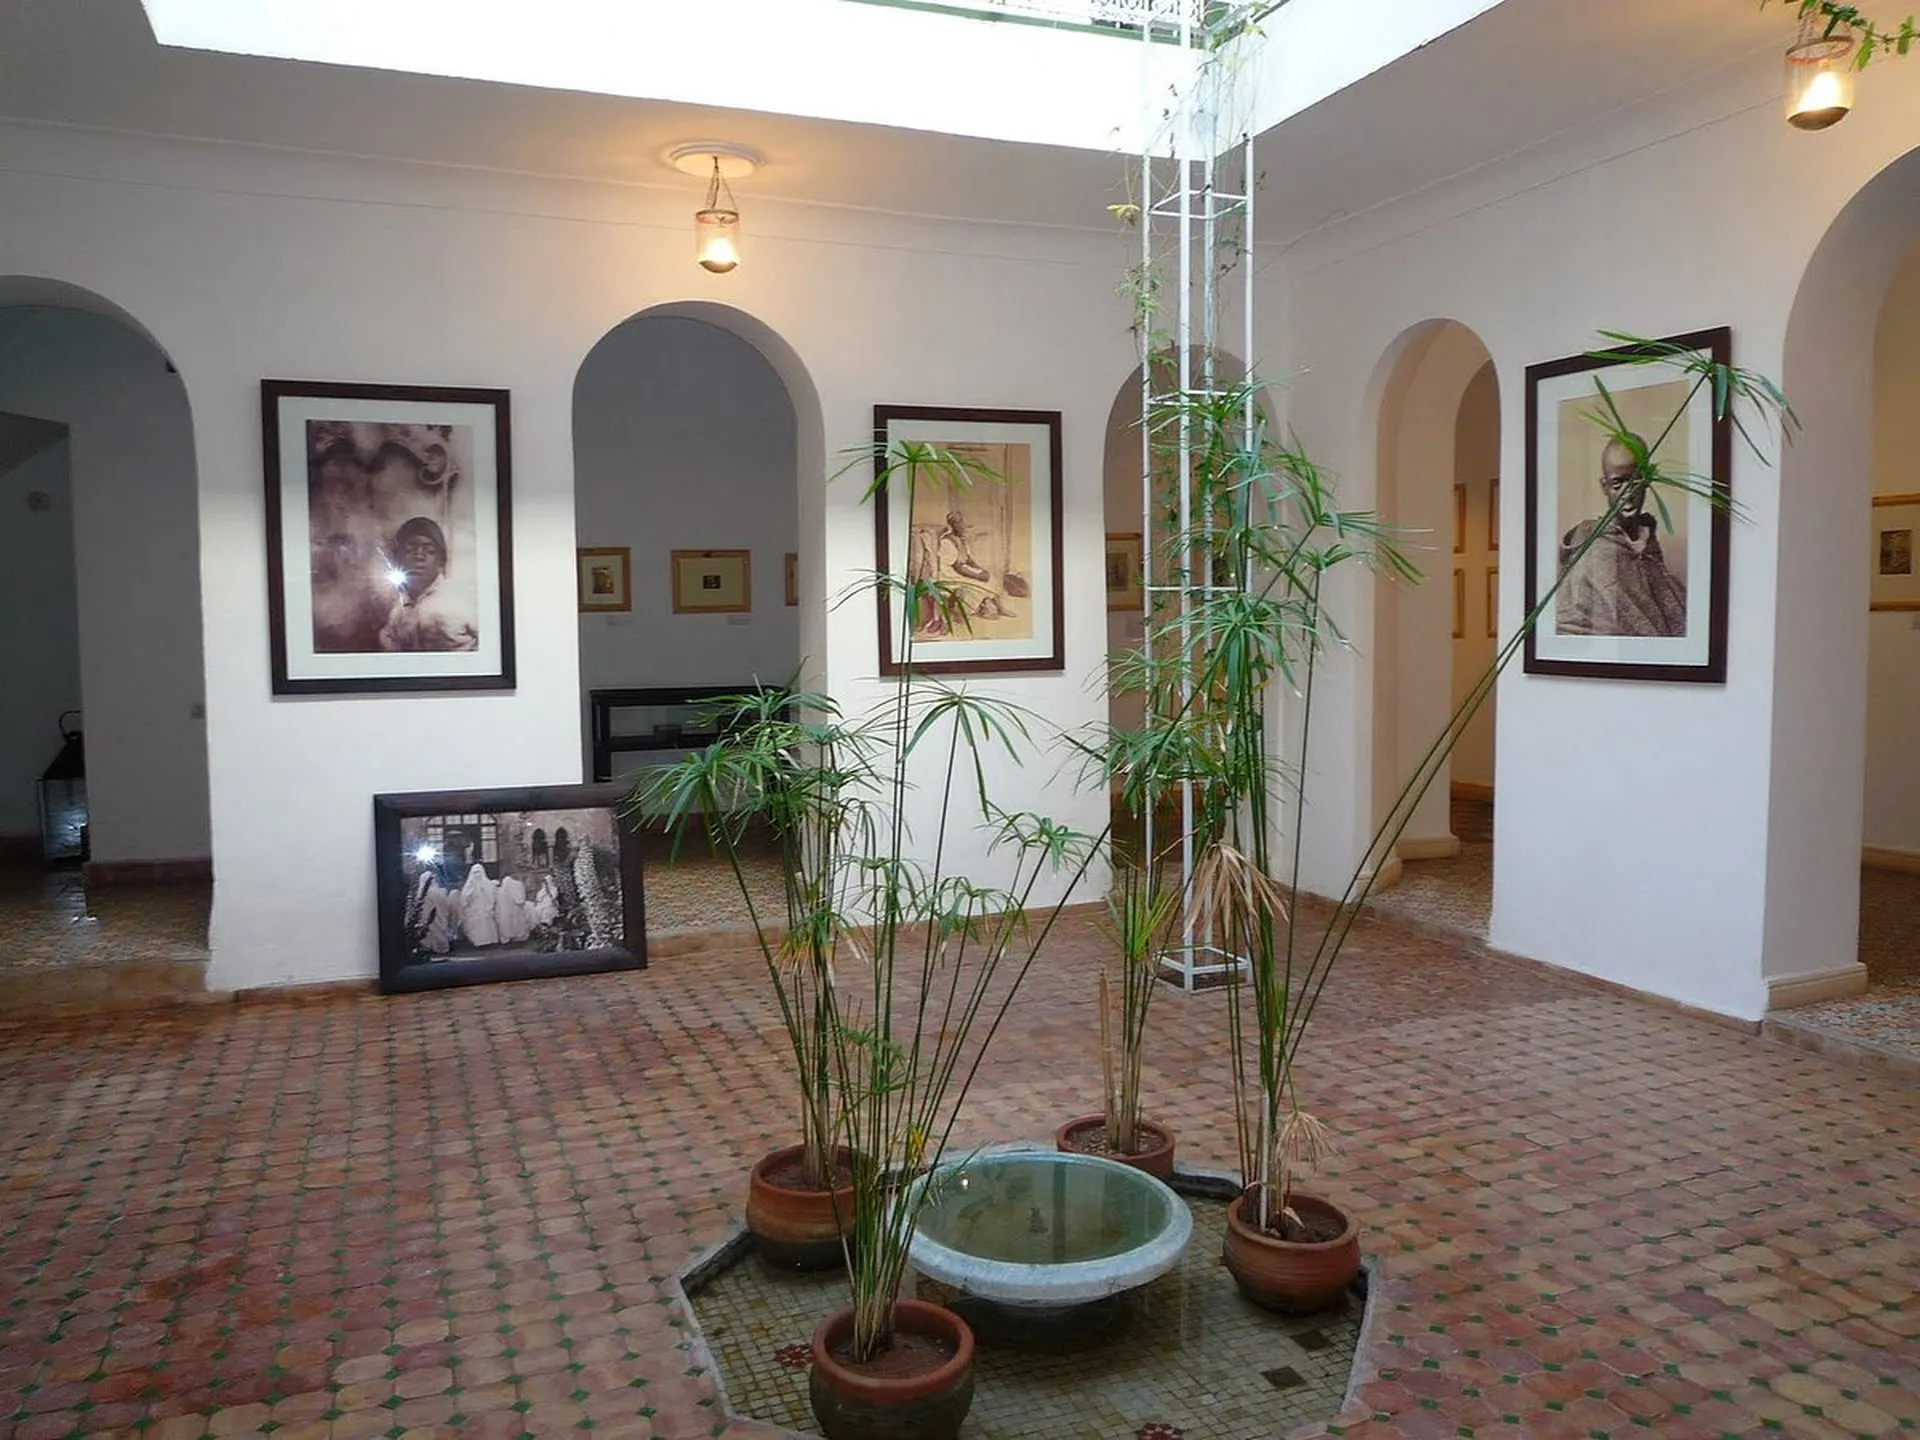 The House of Photography of Marrakech